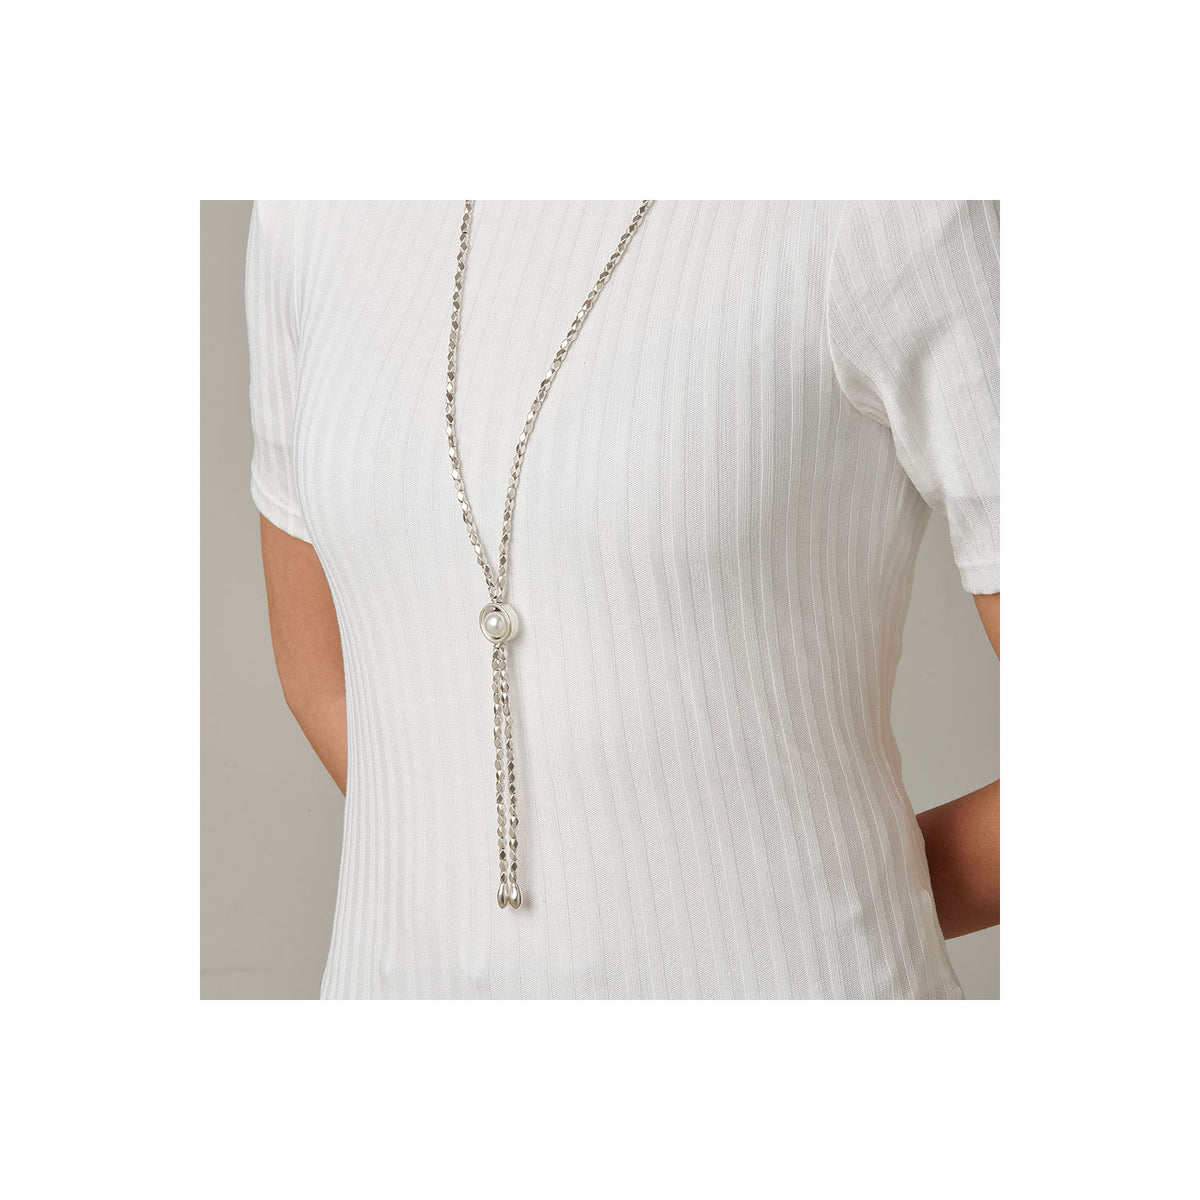 uno de 50 make a wish 44mm long necklace in metal clad with silver and pearl.